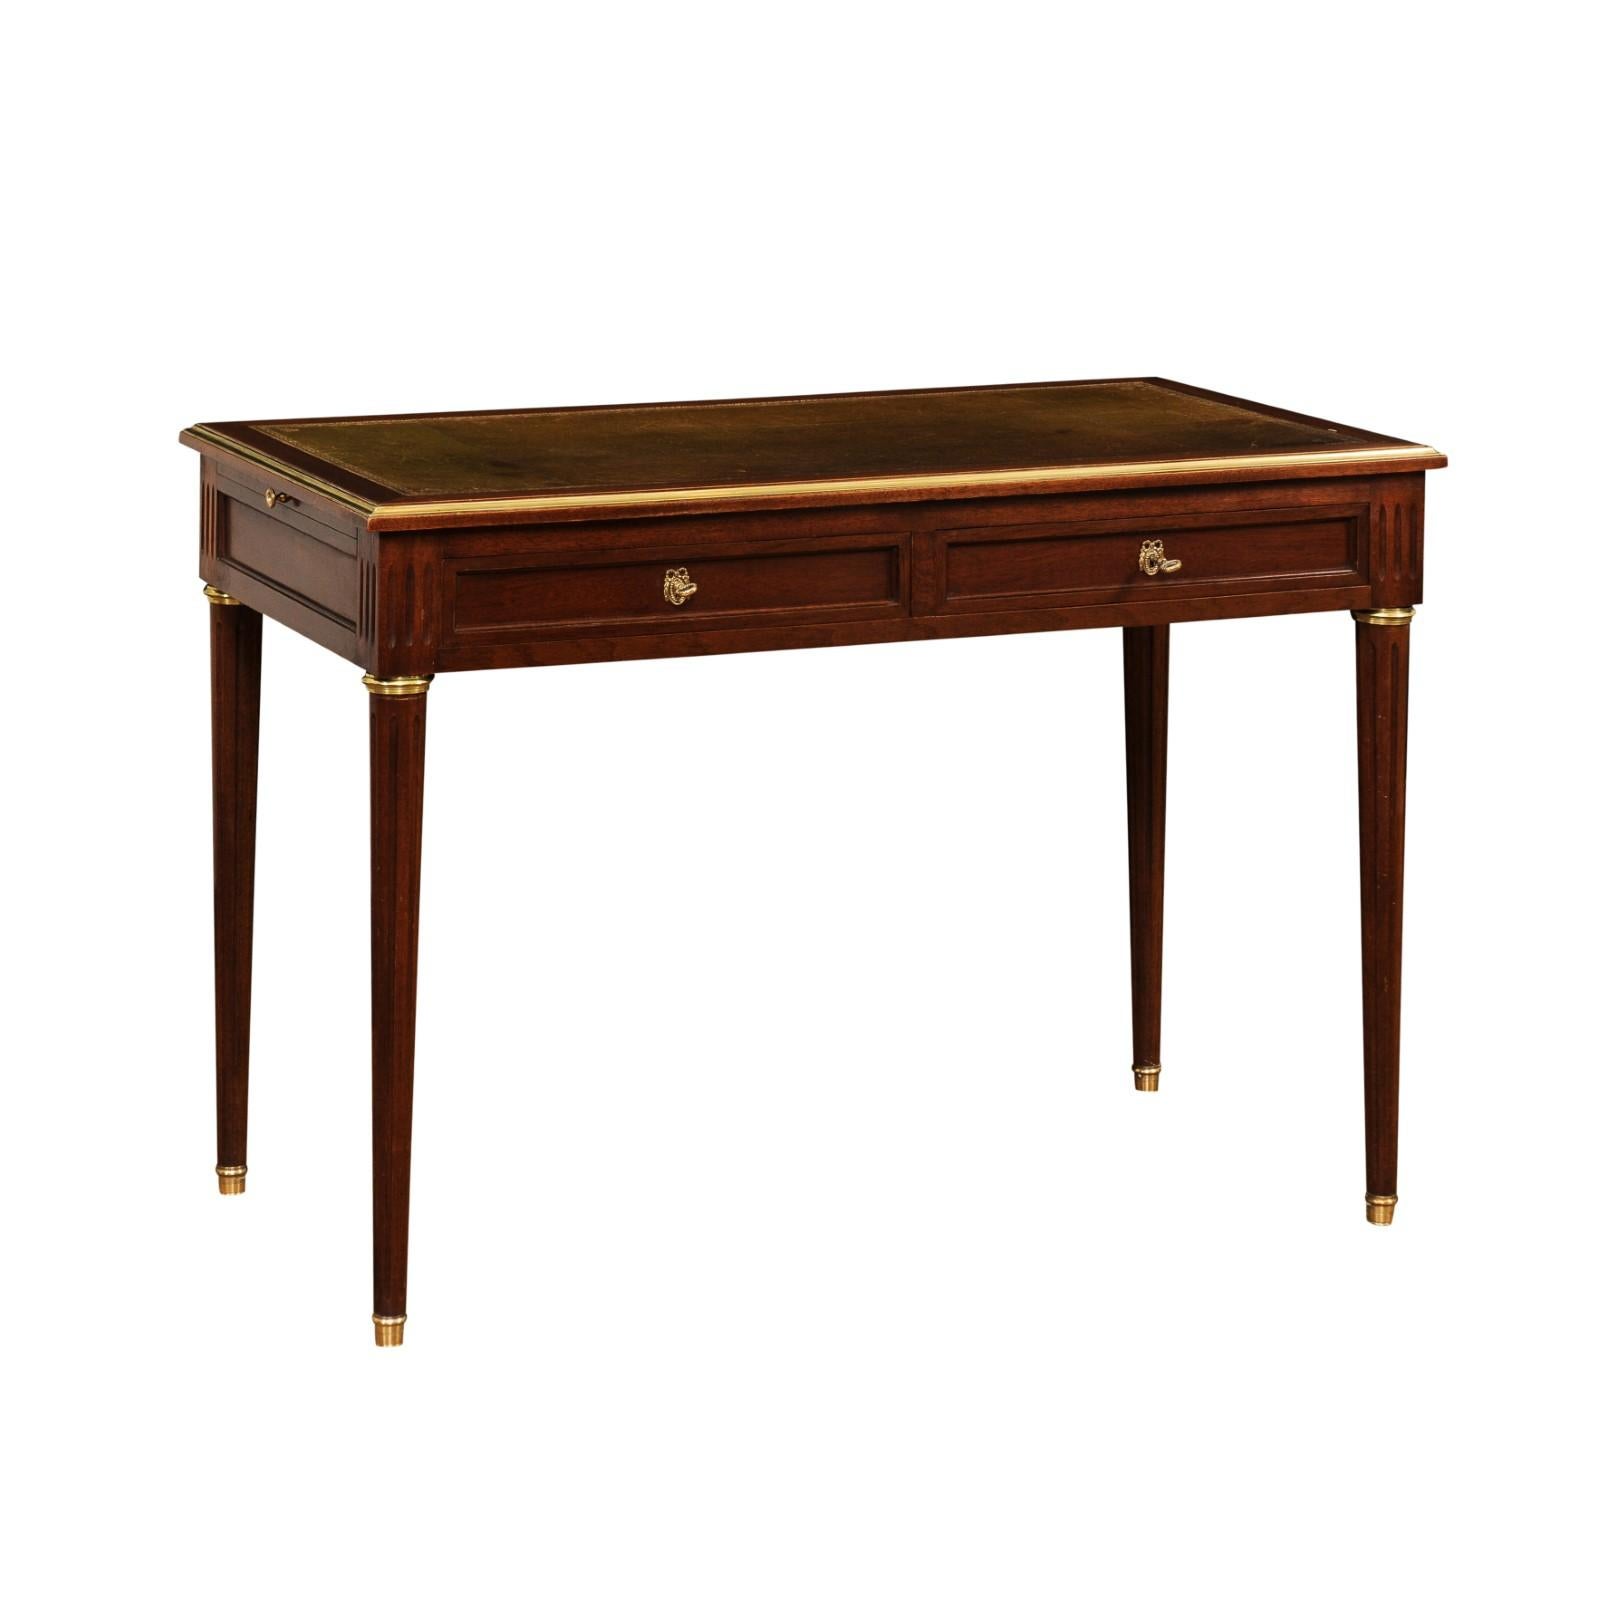 A French Louis XVI style mahogany and mahogany veneer desk from the early 20th century, with olive leather top, two drawers, lateral pull-outs and cylindrical legs on bronze feet. Created in France during the Turn of the Century, this Louis XVI